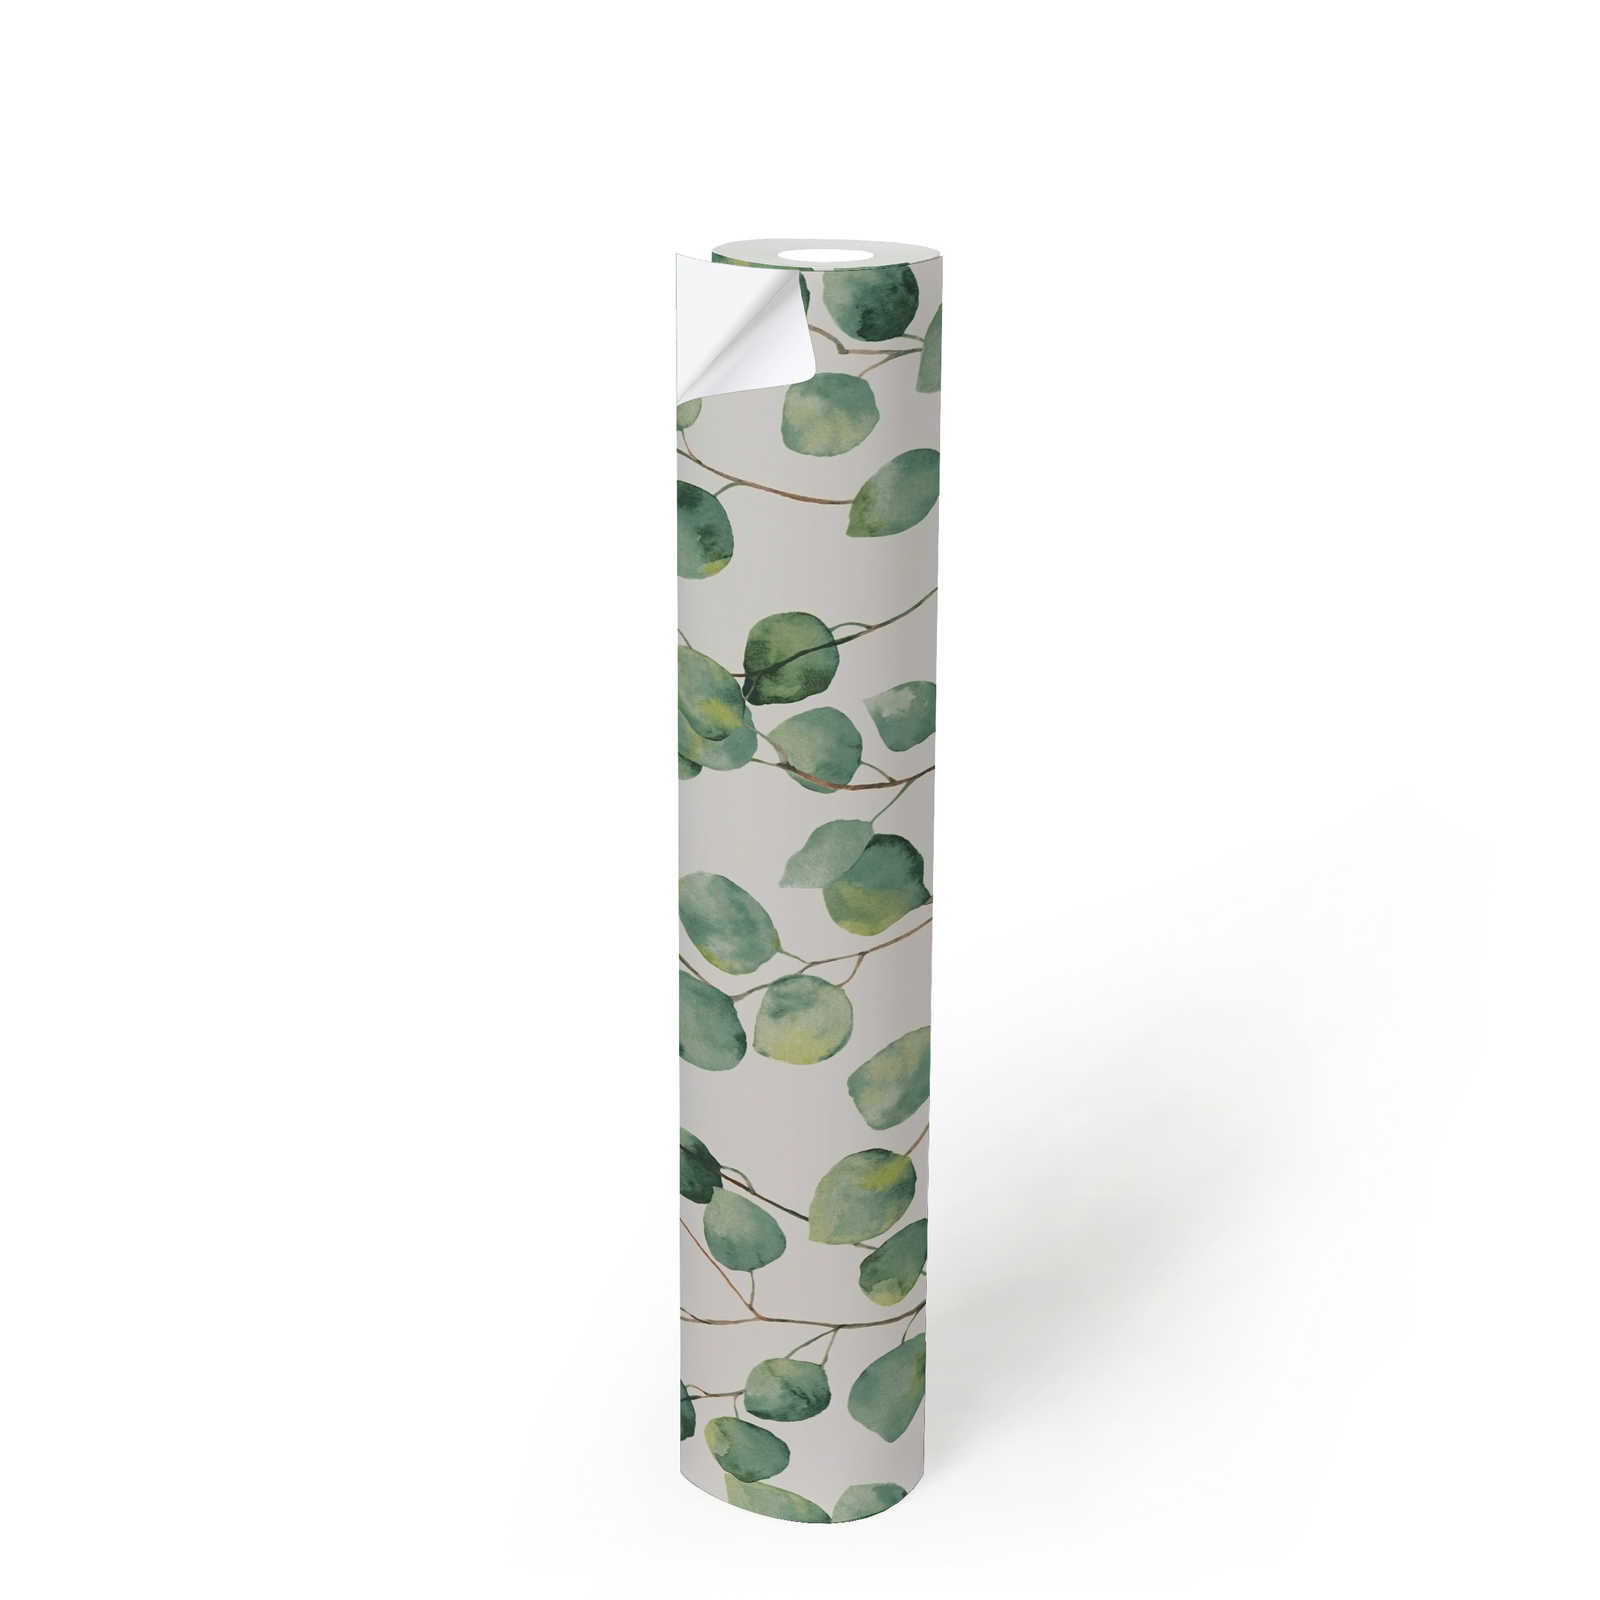             Self-adhesive wallpaper | leaf tendrils in watercolour style - white, green
        